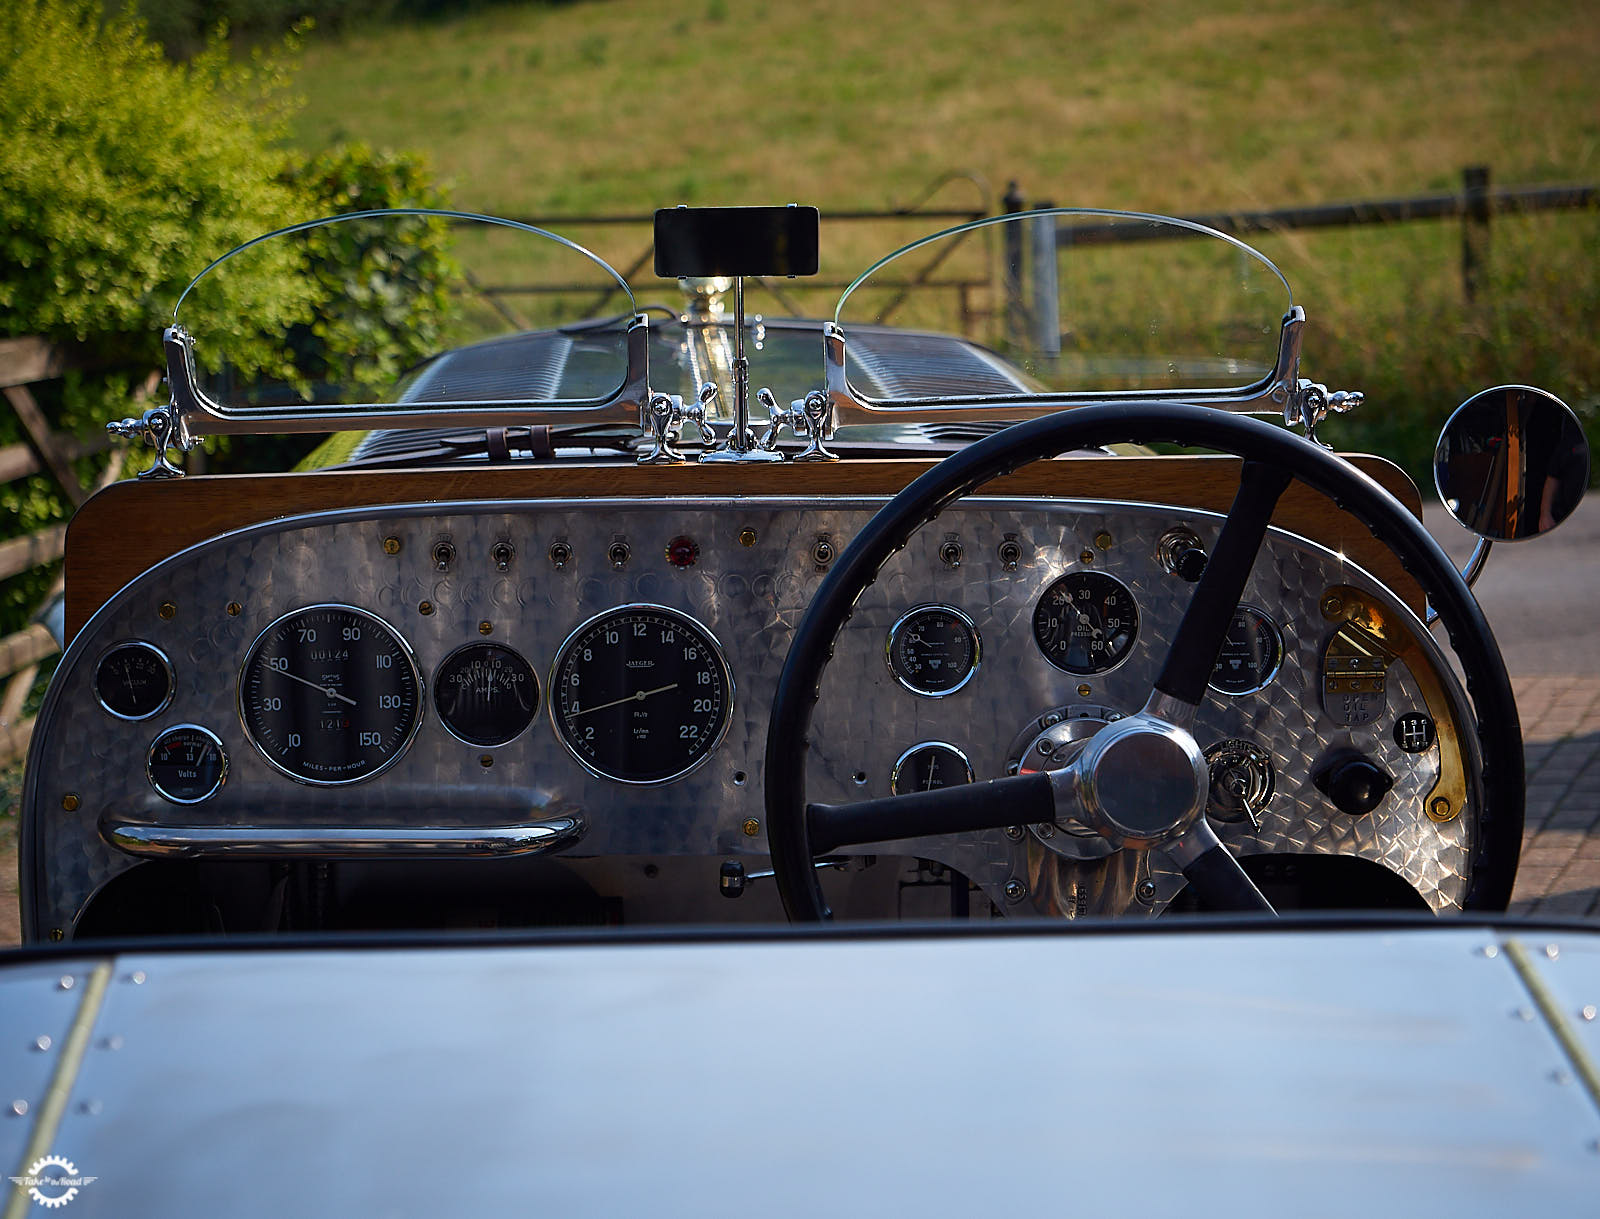 An afternoon with a 1924 Minerva Liberty Special 27 litre V12